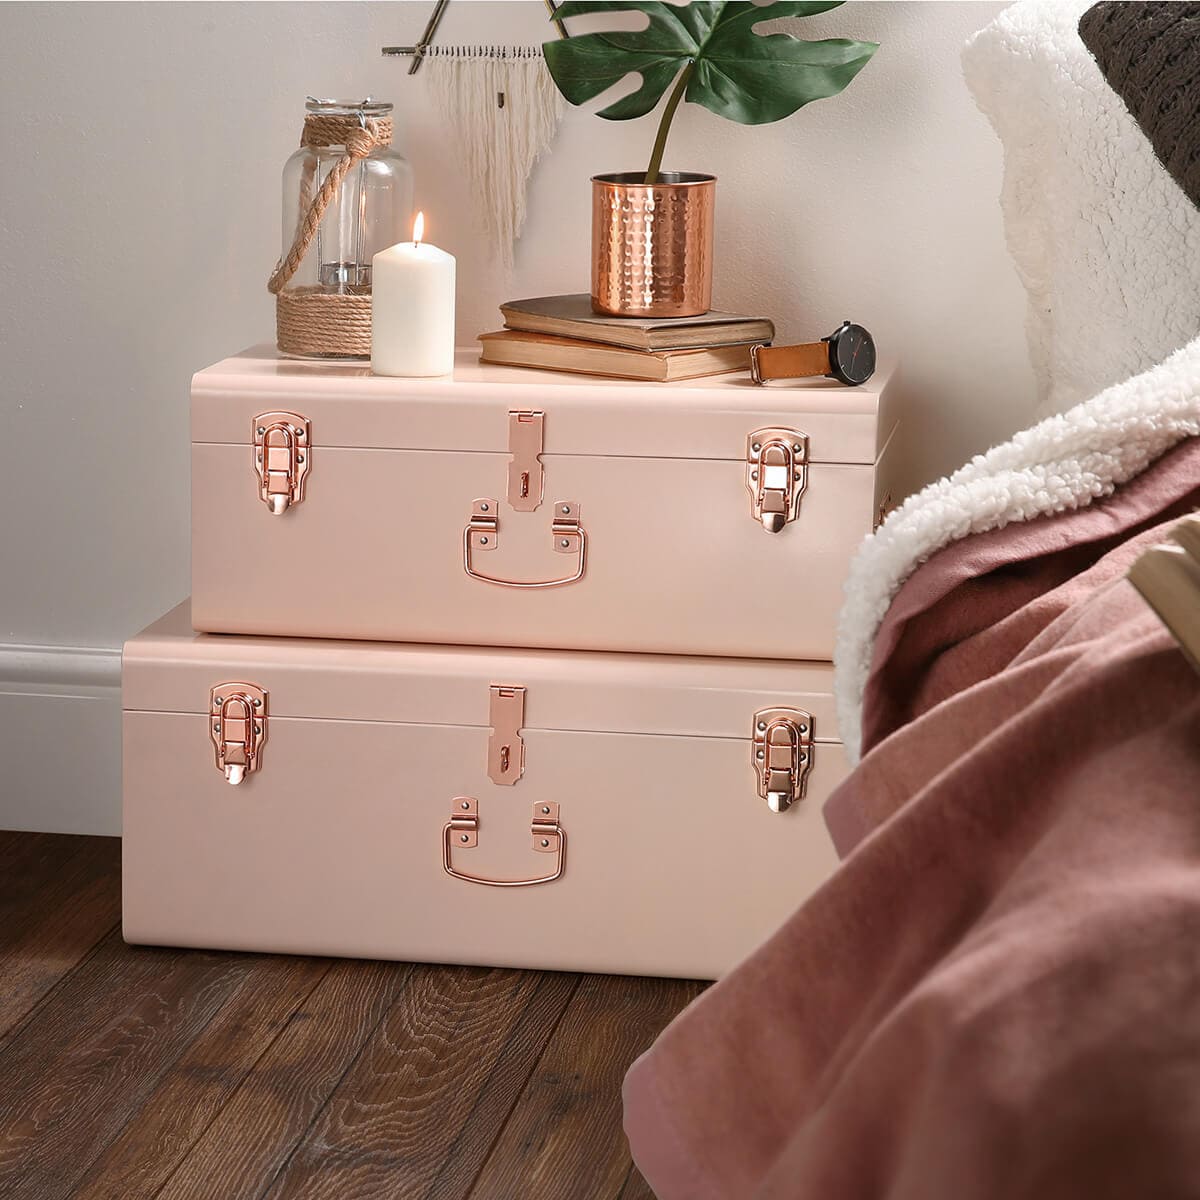 Stunning copper and blush ideas all girls will fall in love with - 79